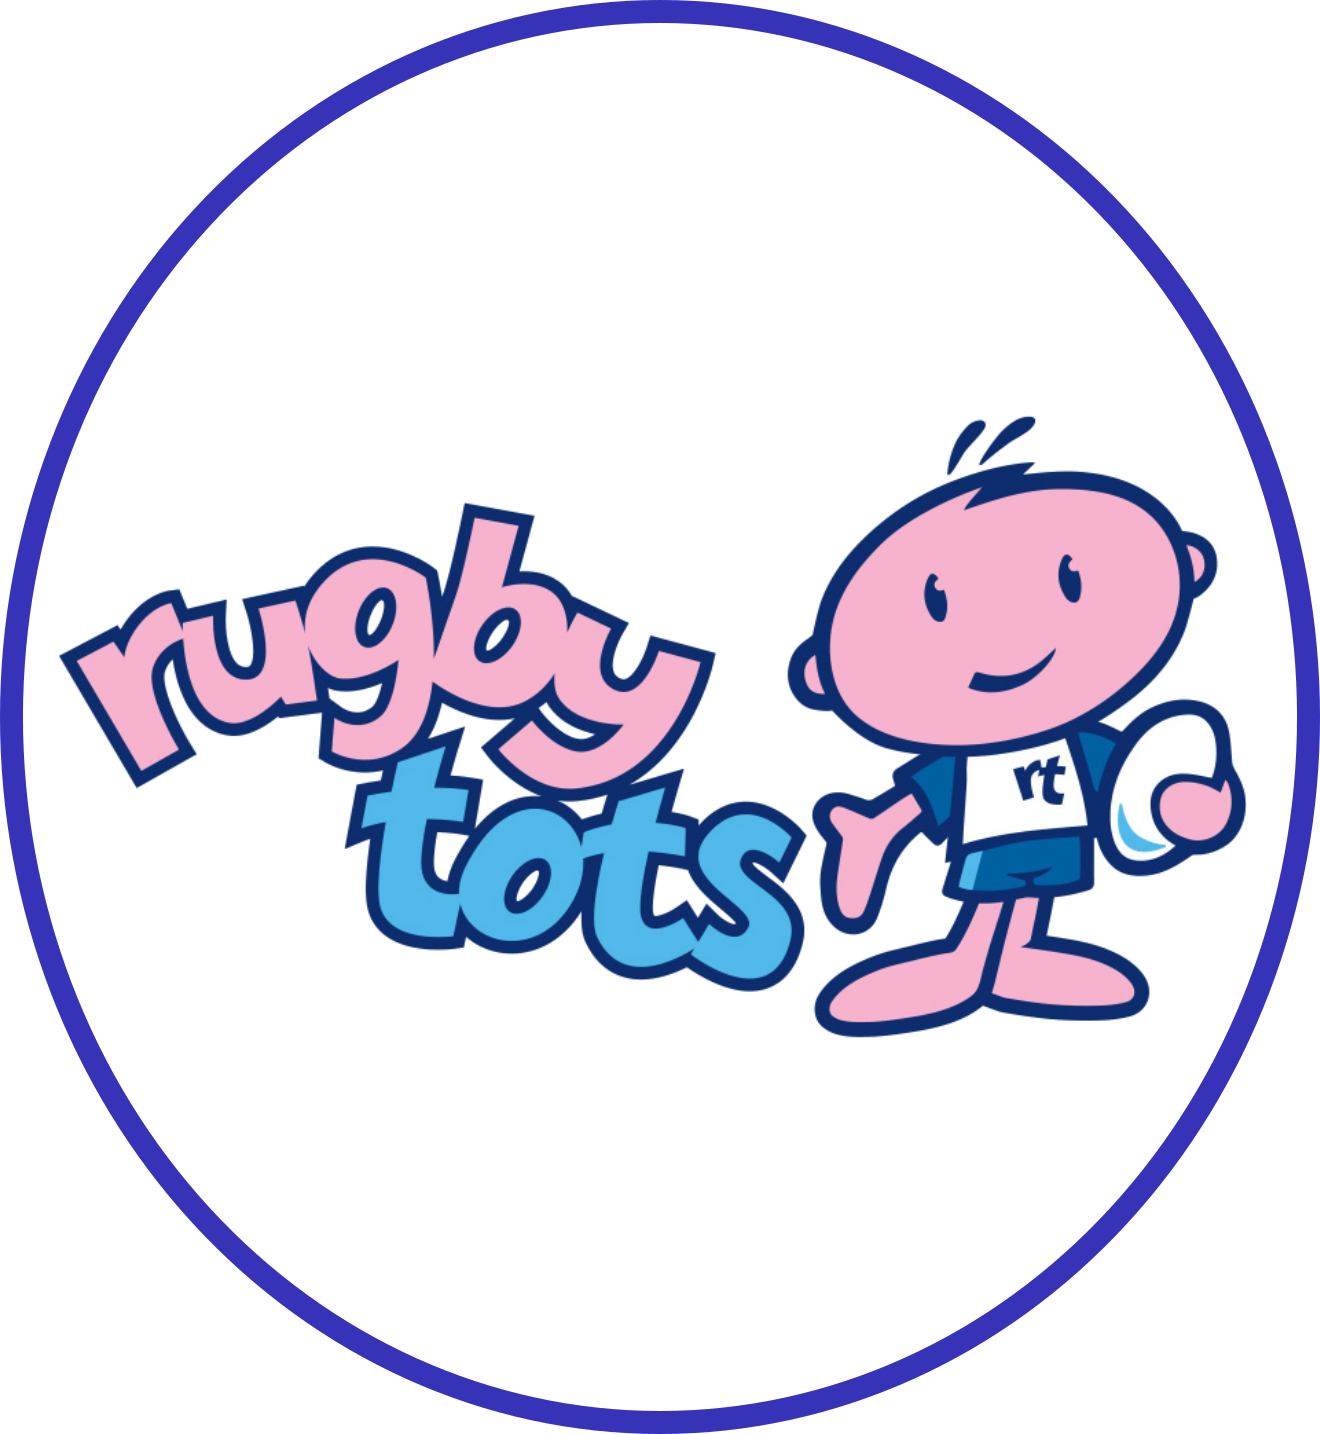 RUGBYTOTS